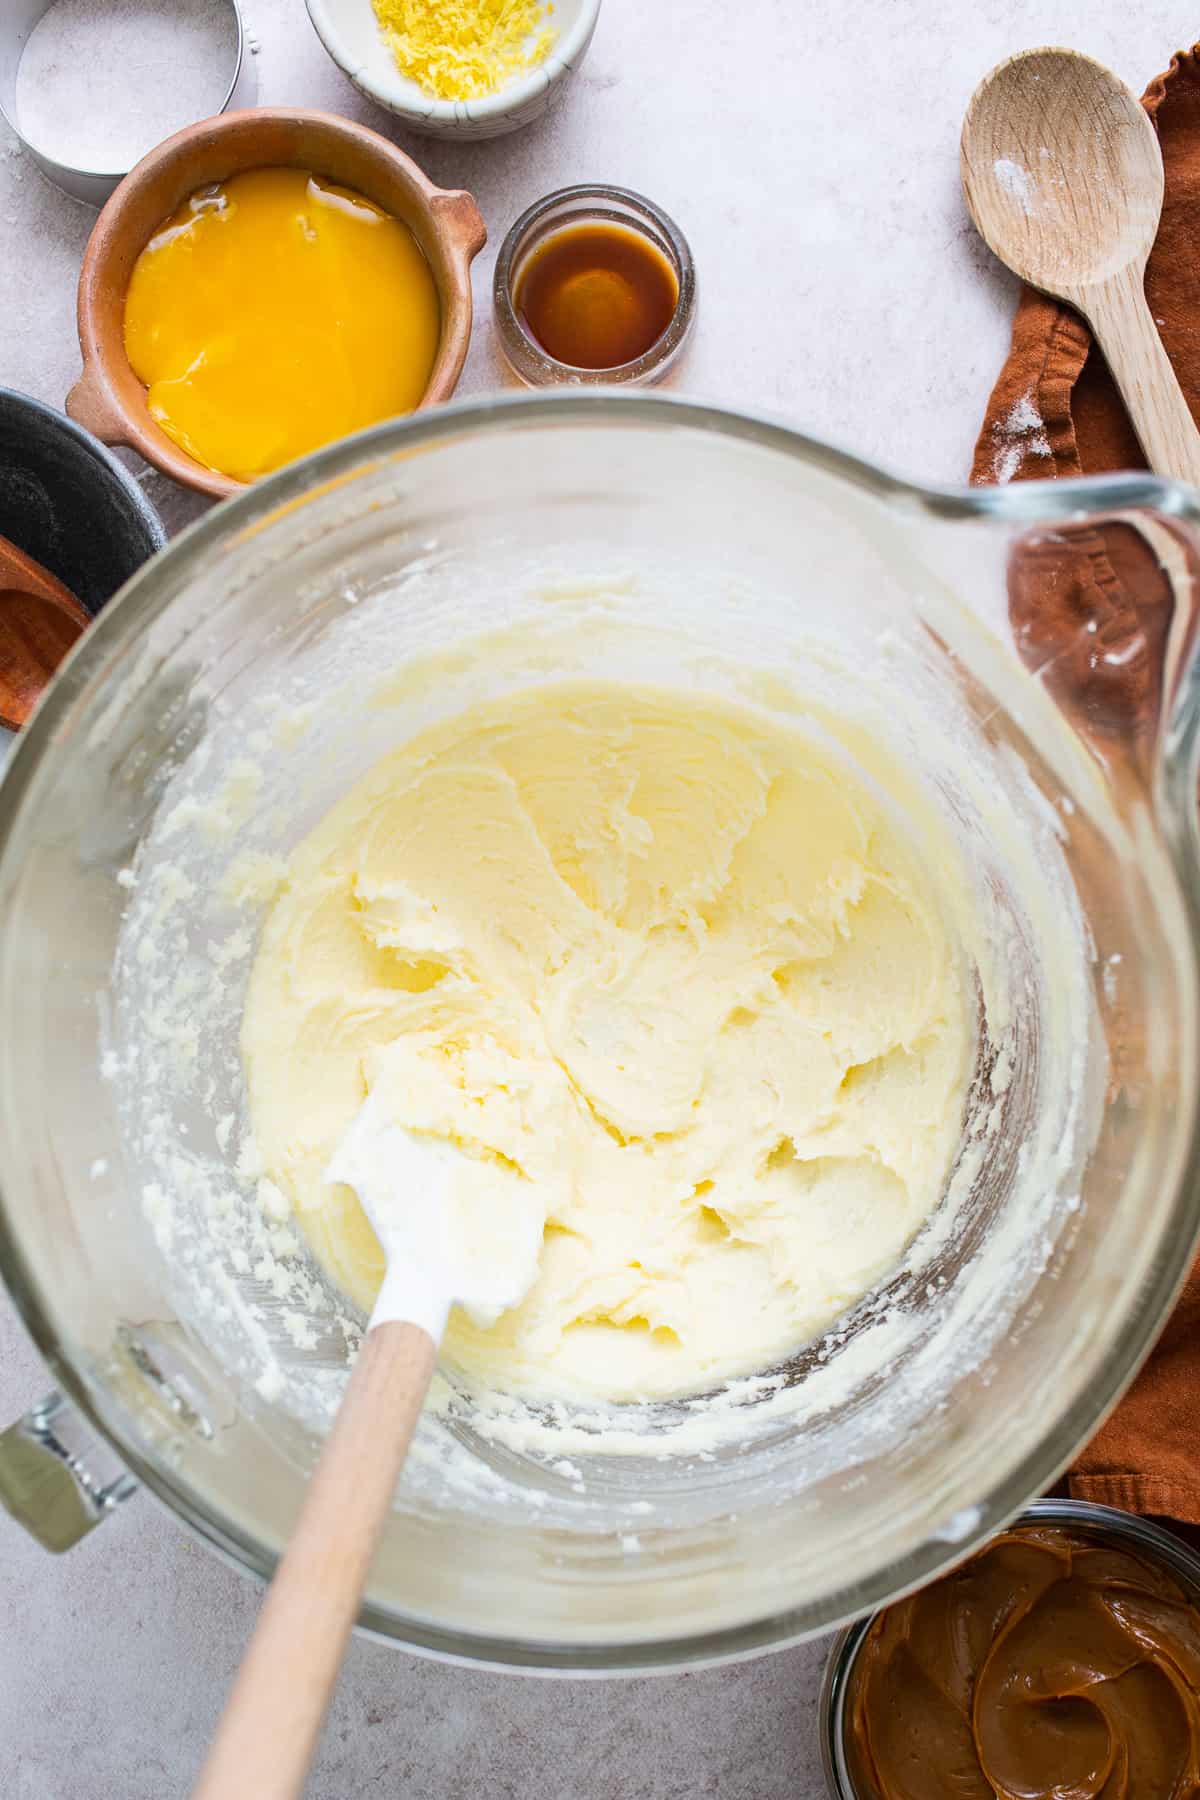 Creamed butter and sugar in a mixing bowl.